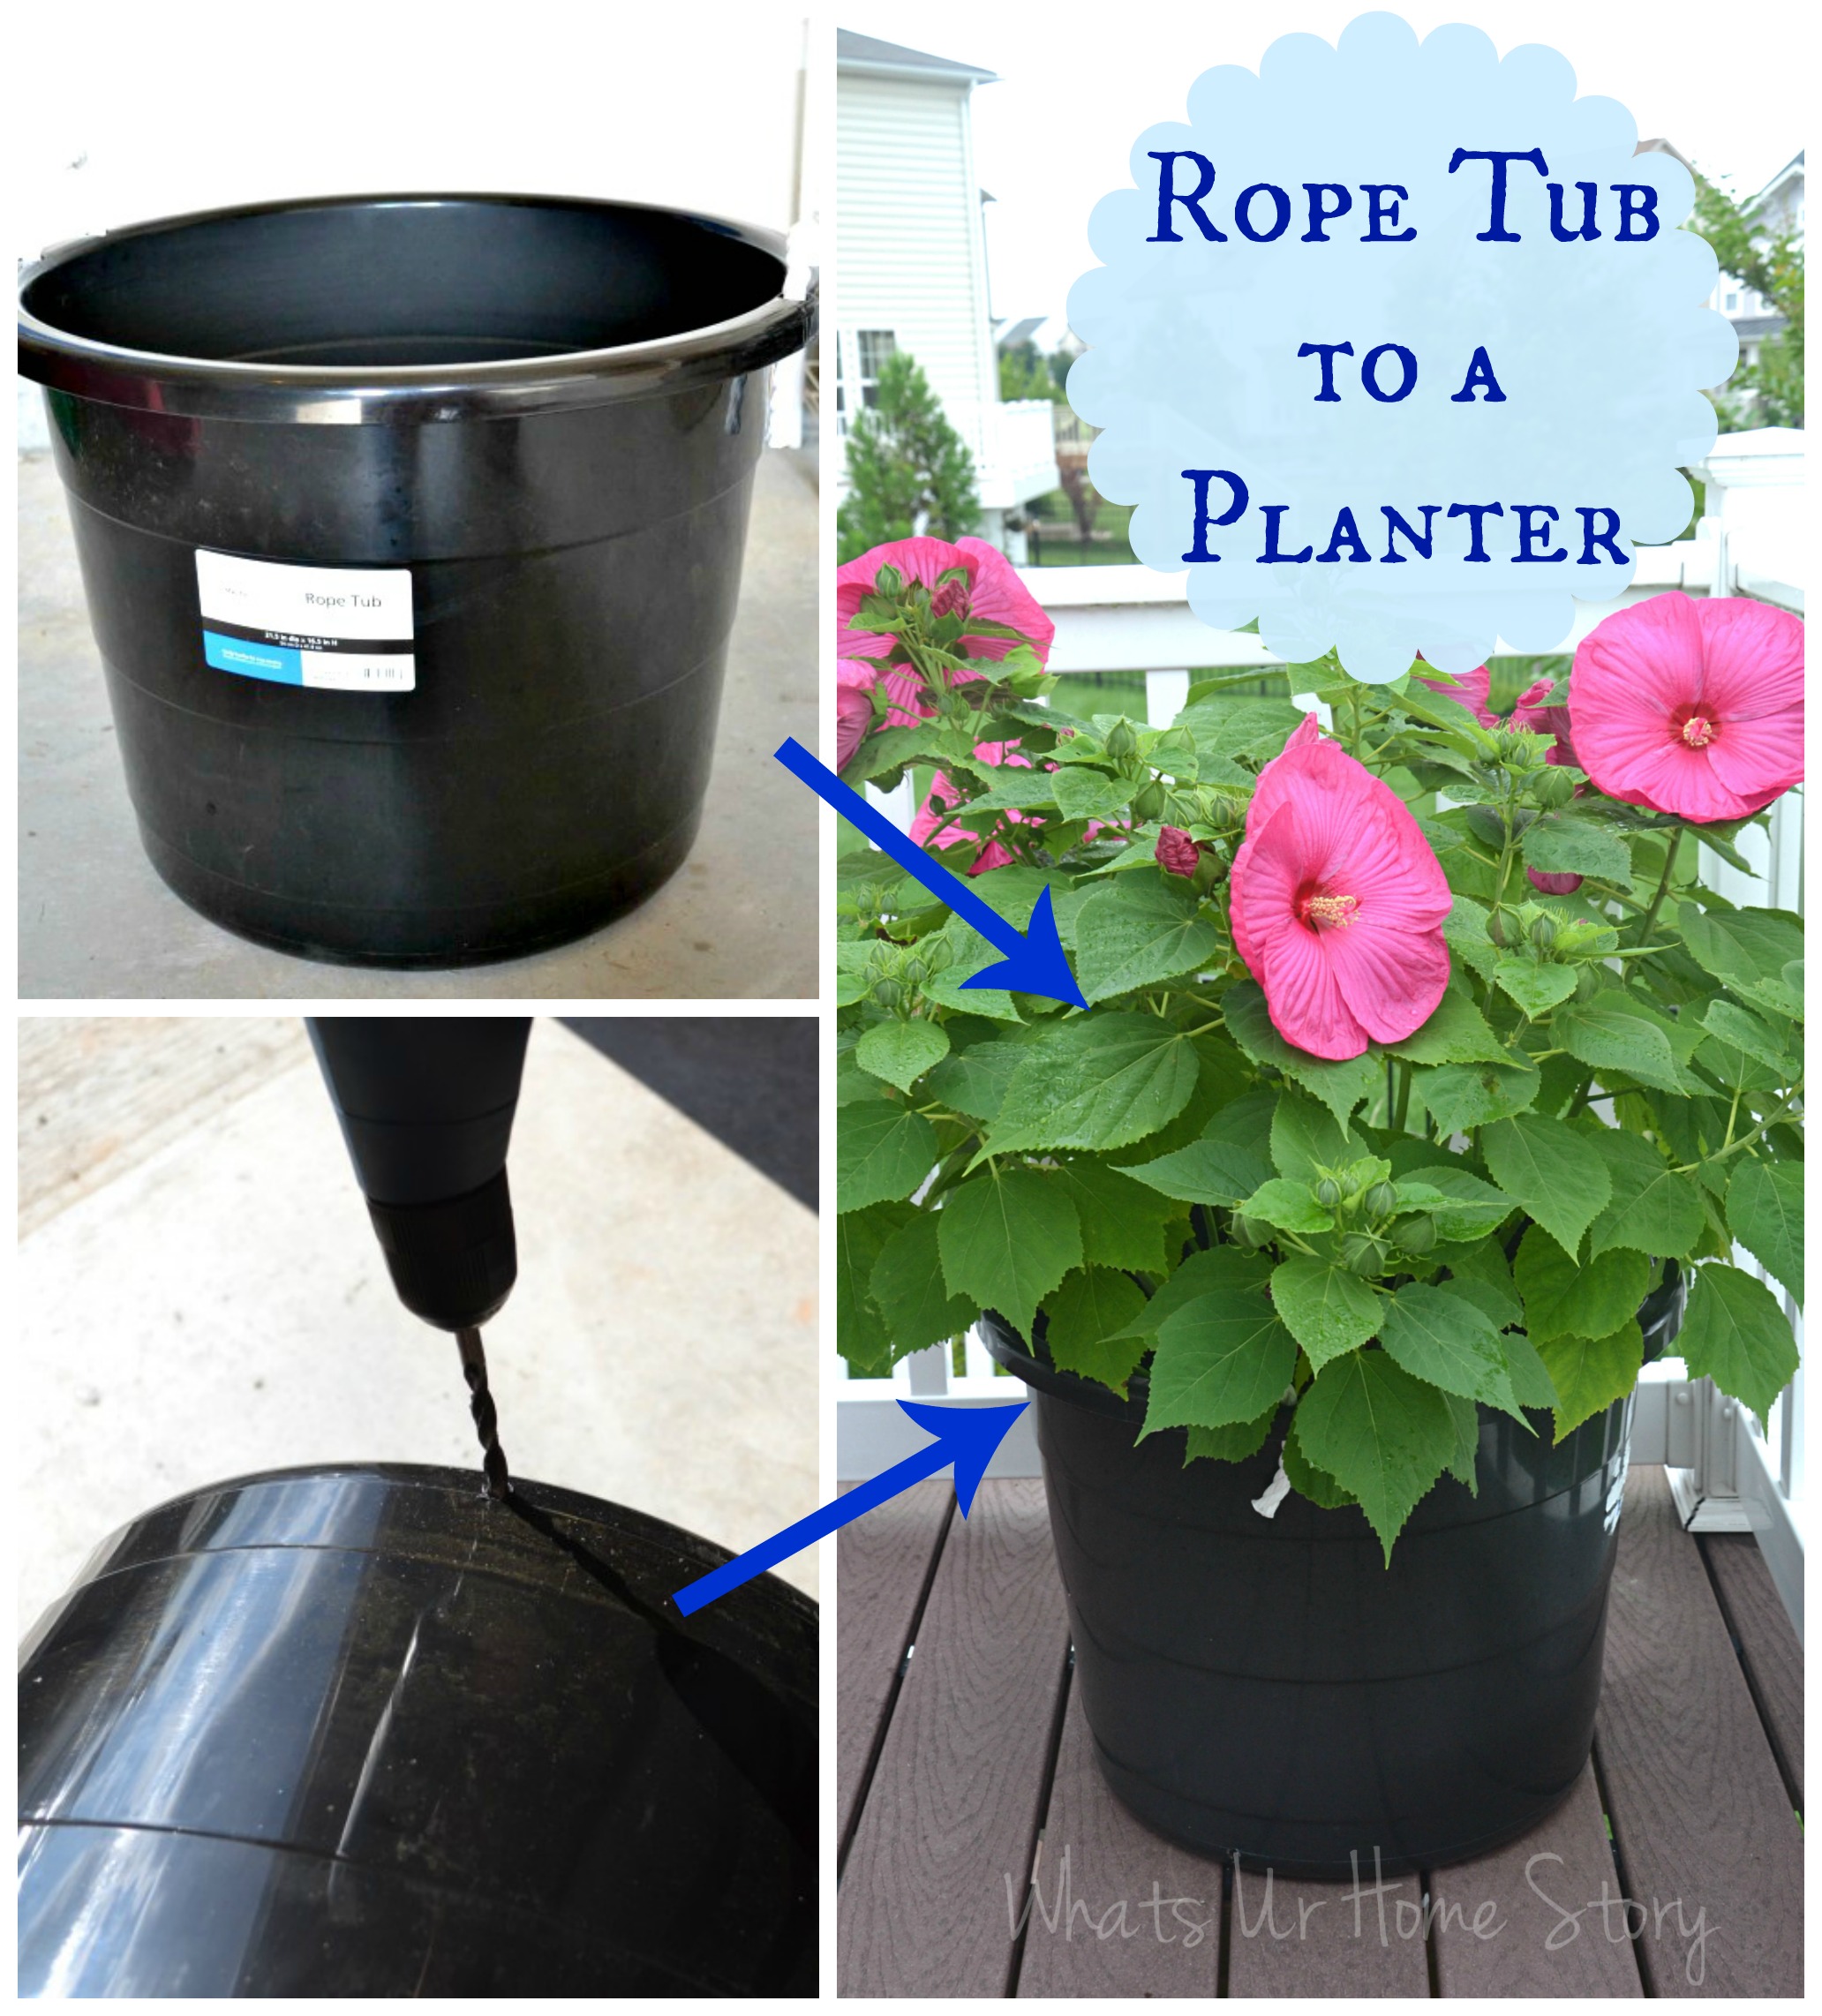 https://www.whatsurhomestory.com/wp-content/uploads/2012/08/turn-a-rope-tub-into-a-planter.jpg